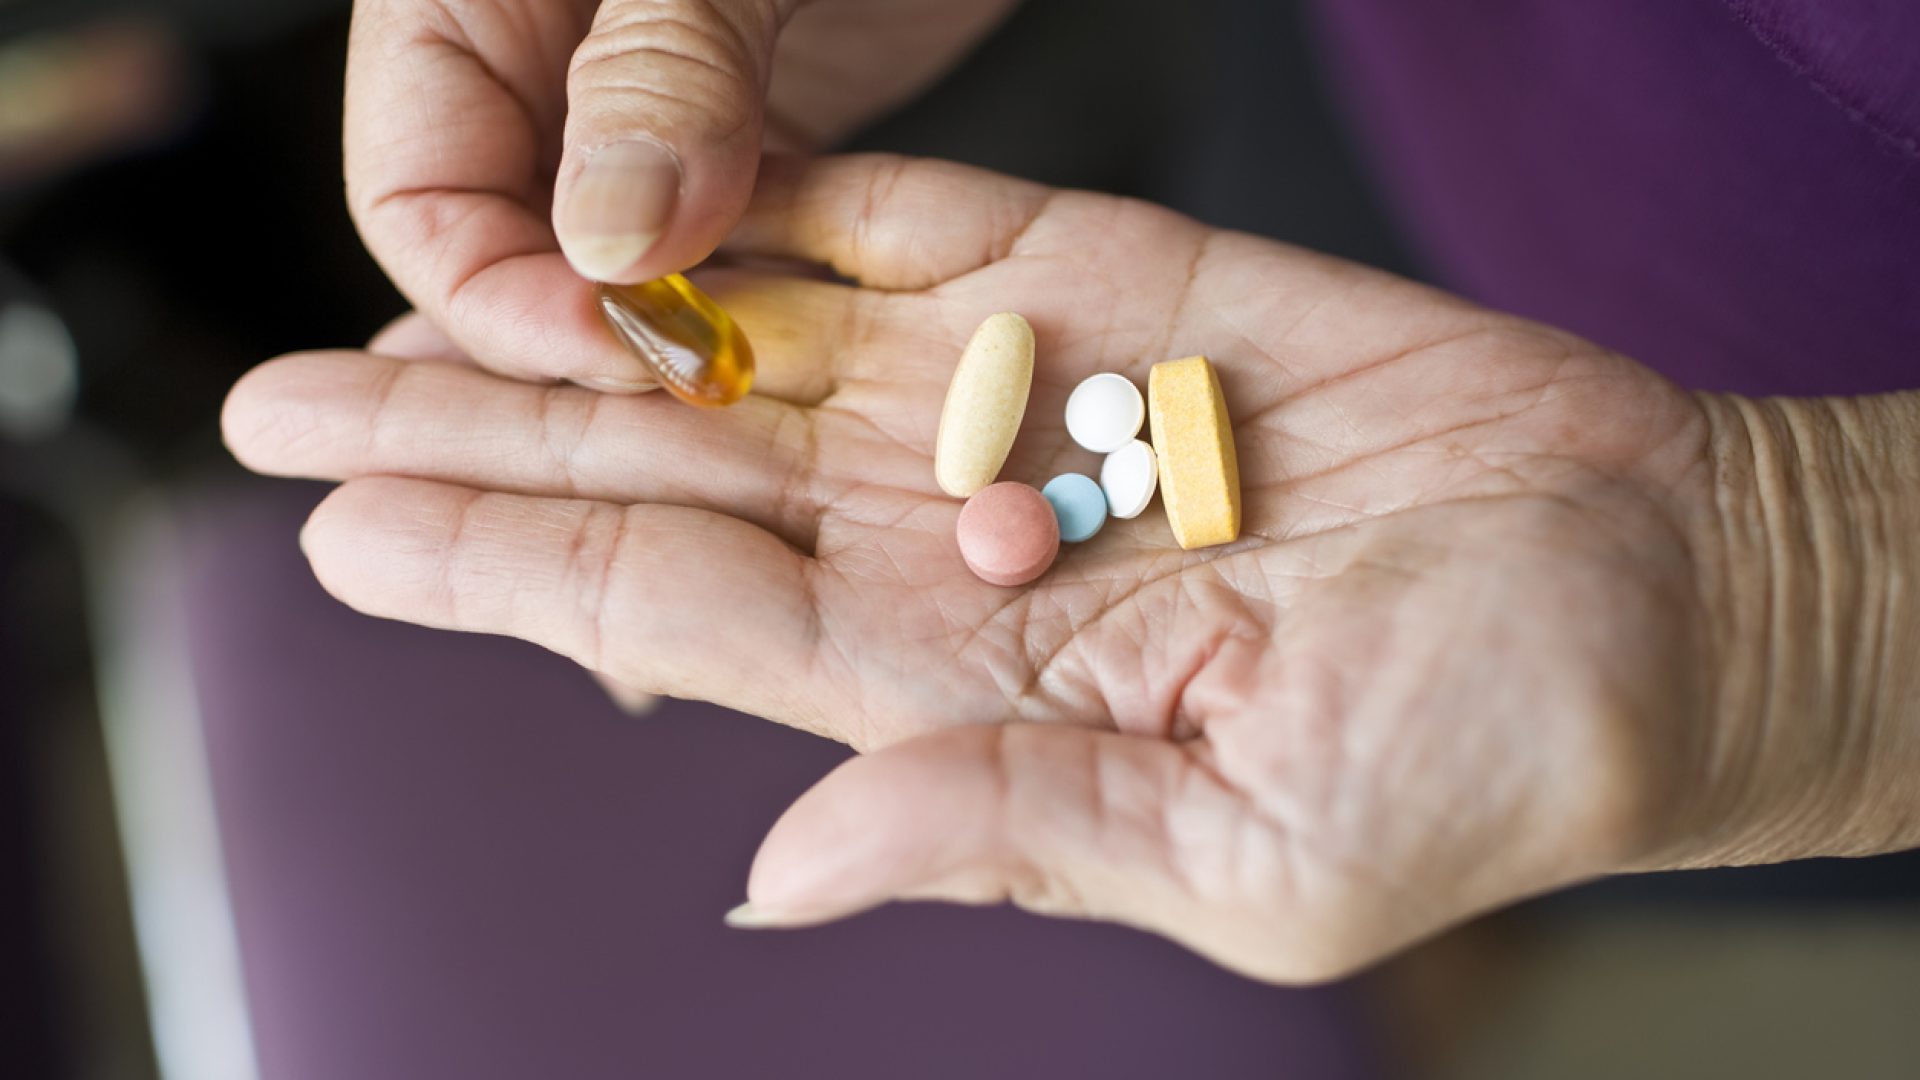 5 Supplements You Should Take for Memory Loss, Experts Say